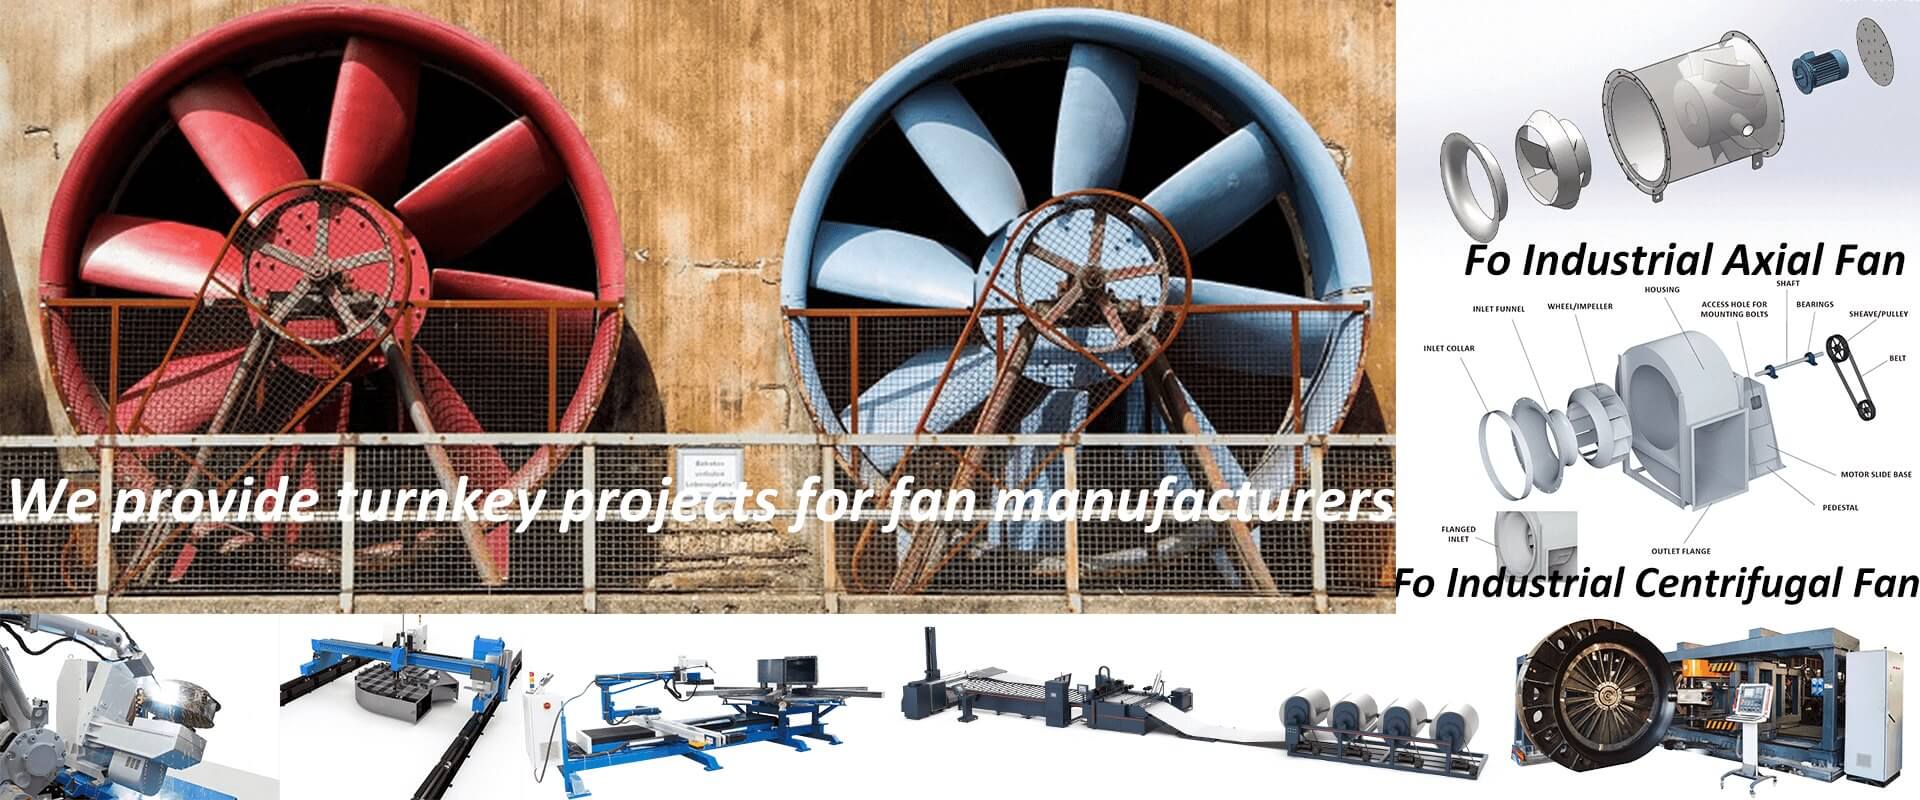 We provide turnkey projects for fan manufacturers